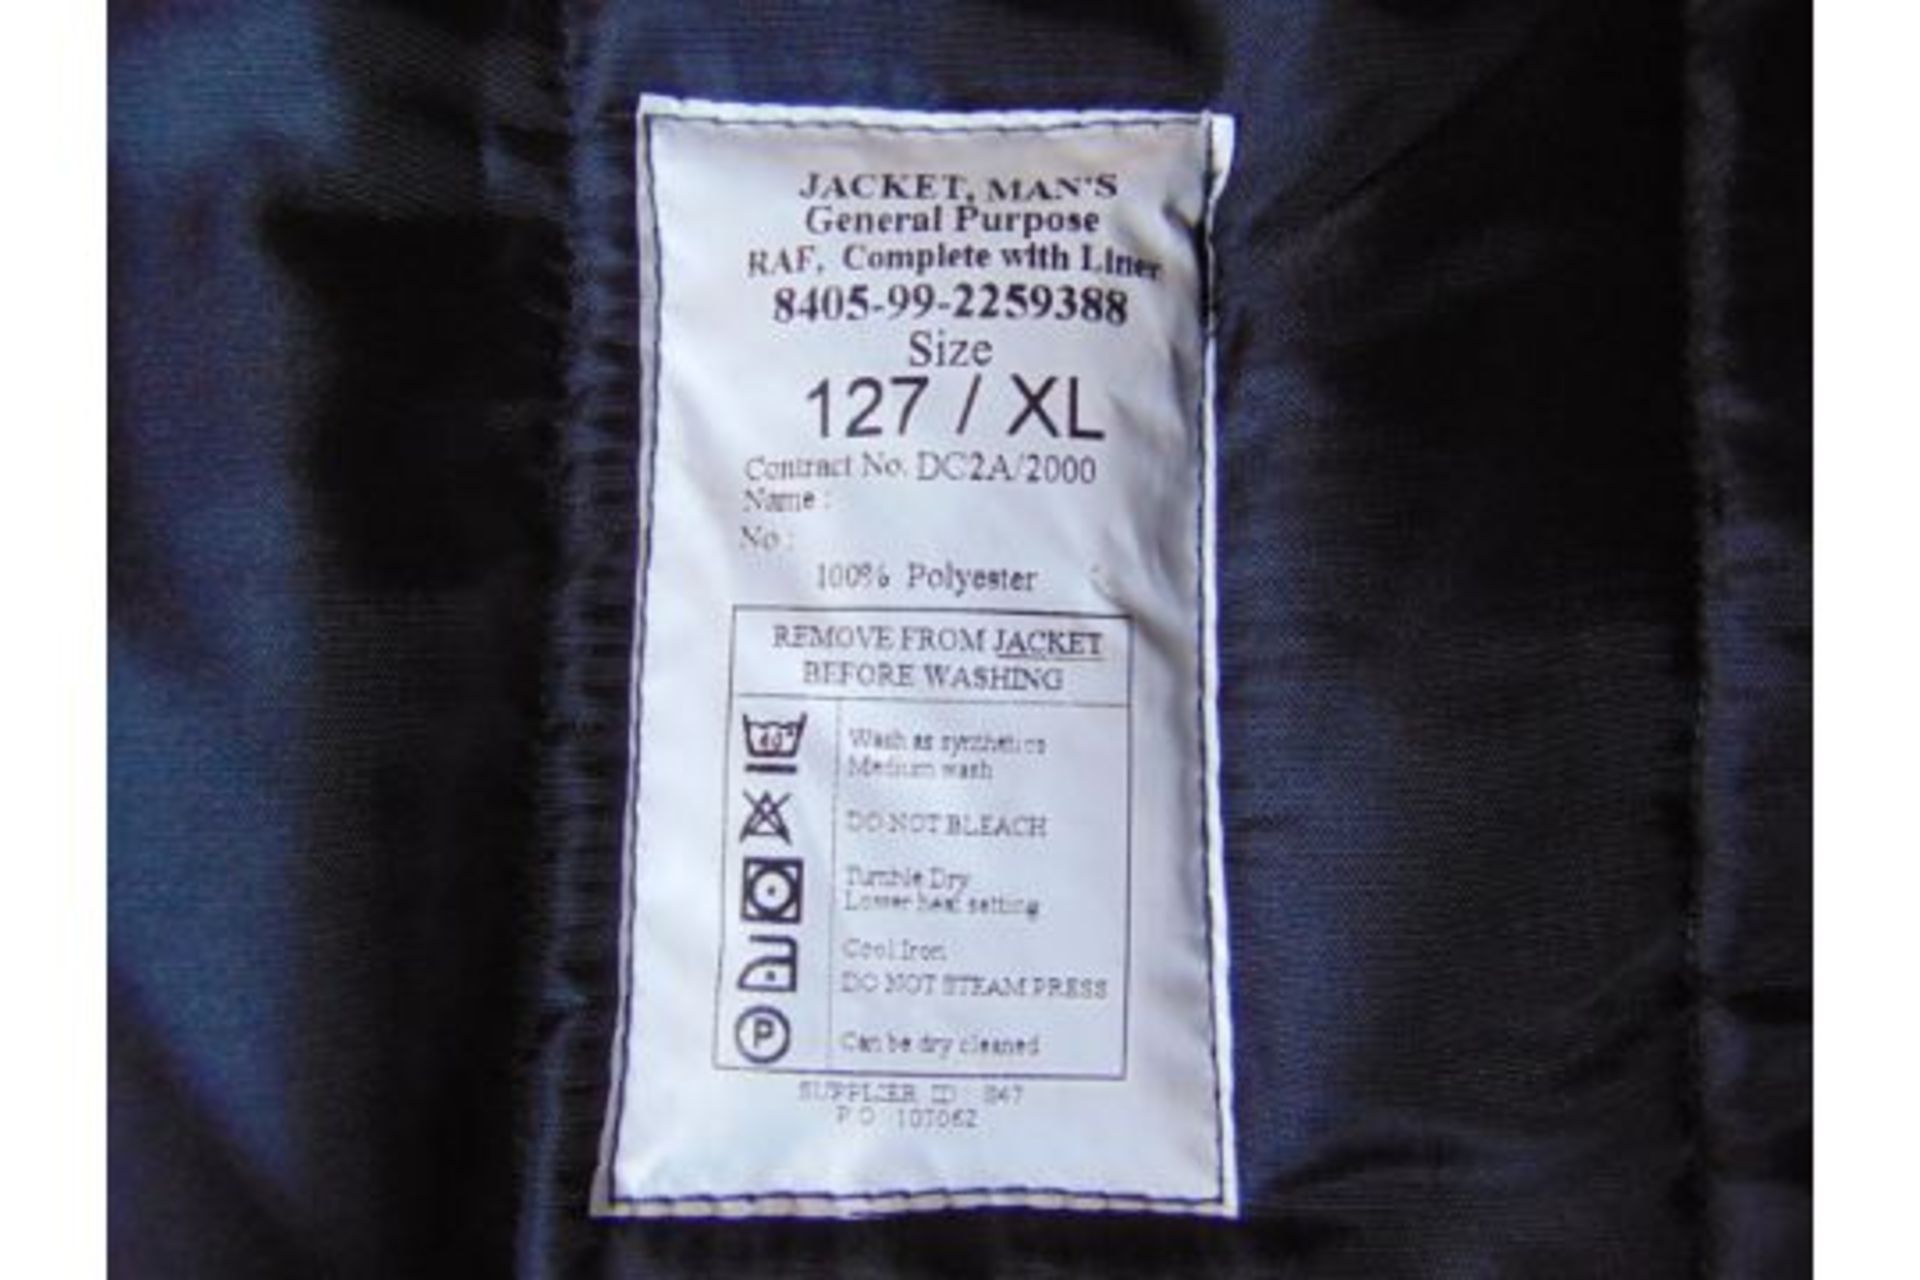 2 x New Unissued RAF issue Pilots Jackets w/ Removeable Liner. - Size Small. - Image 6 of 6